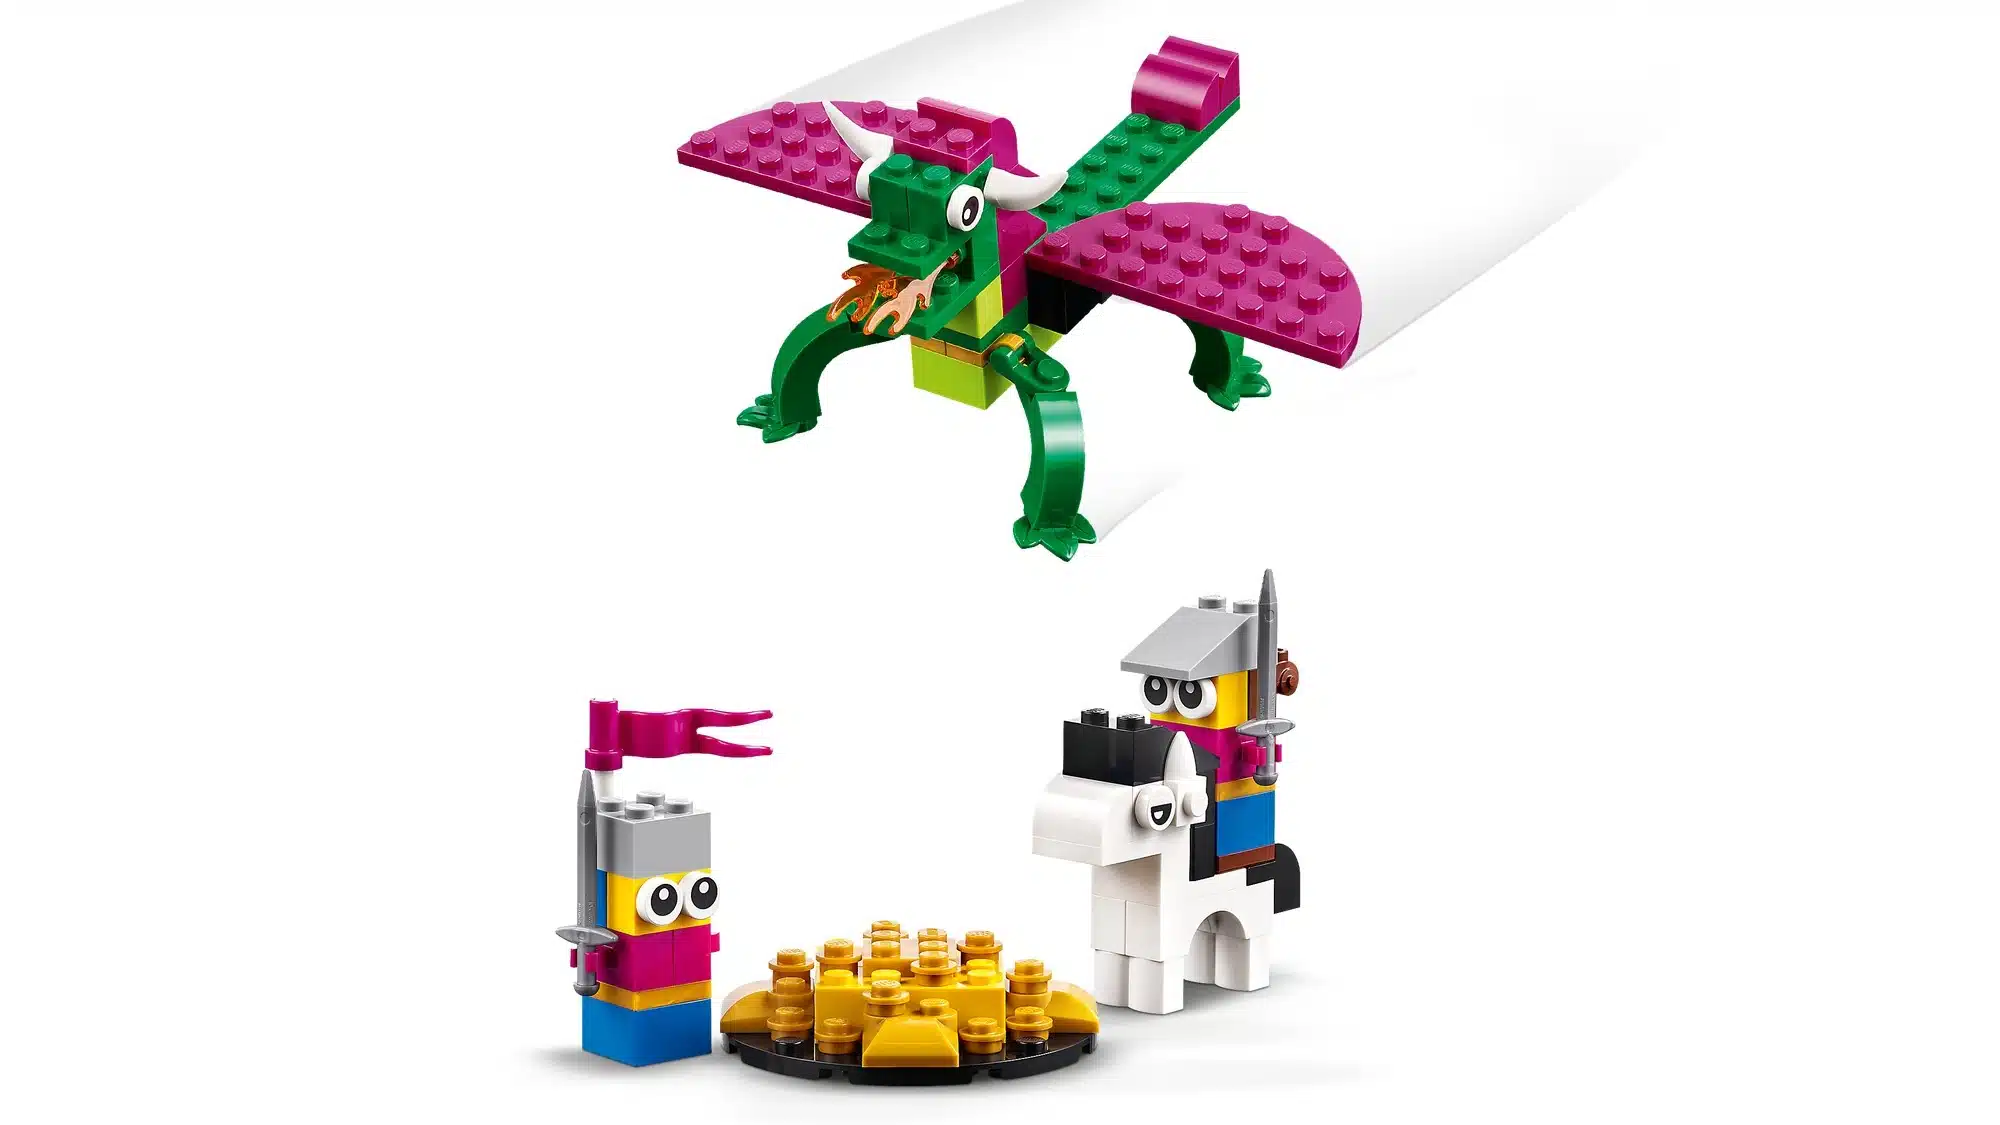 LEGO(R)Classic New Set for March 2023 Officially Revealed - Eye-catching colors and Lots of Bricks! | Release Date March 1st 2023